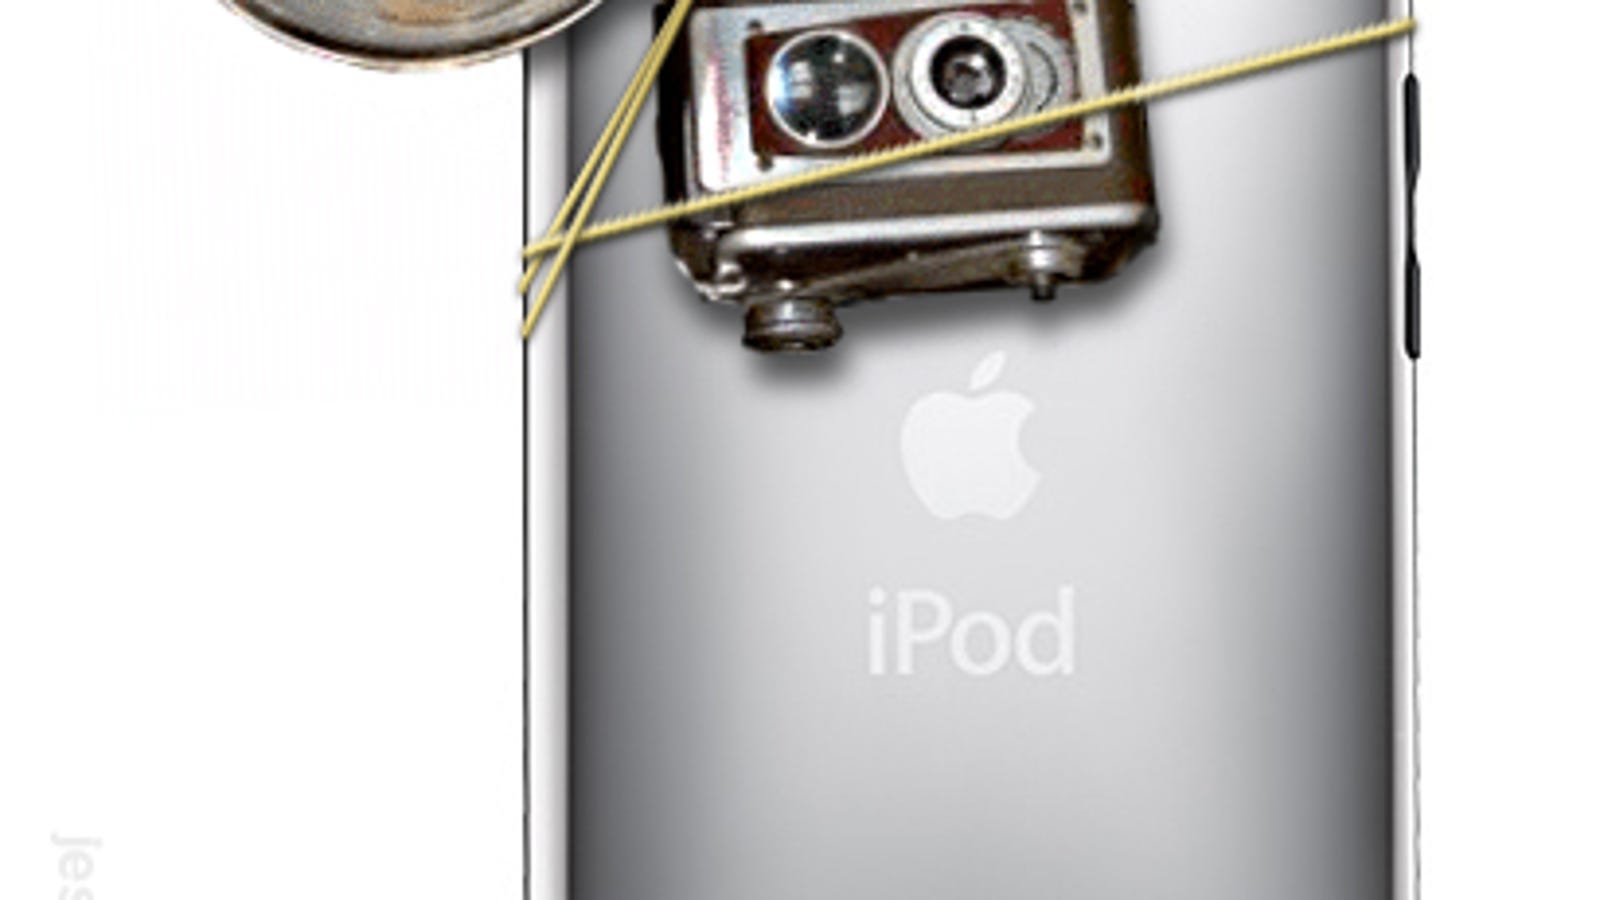 iPod Touch Camera "Could Happen Without Warning"